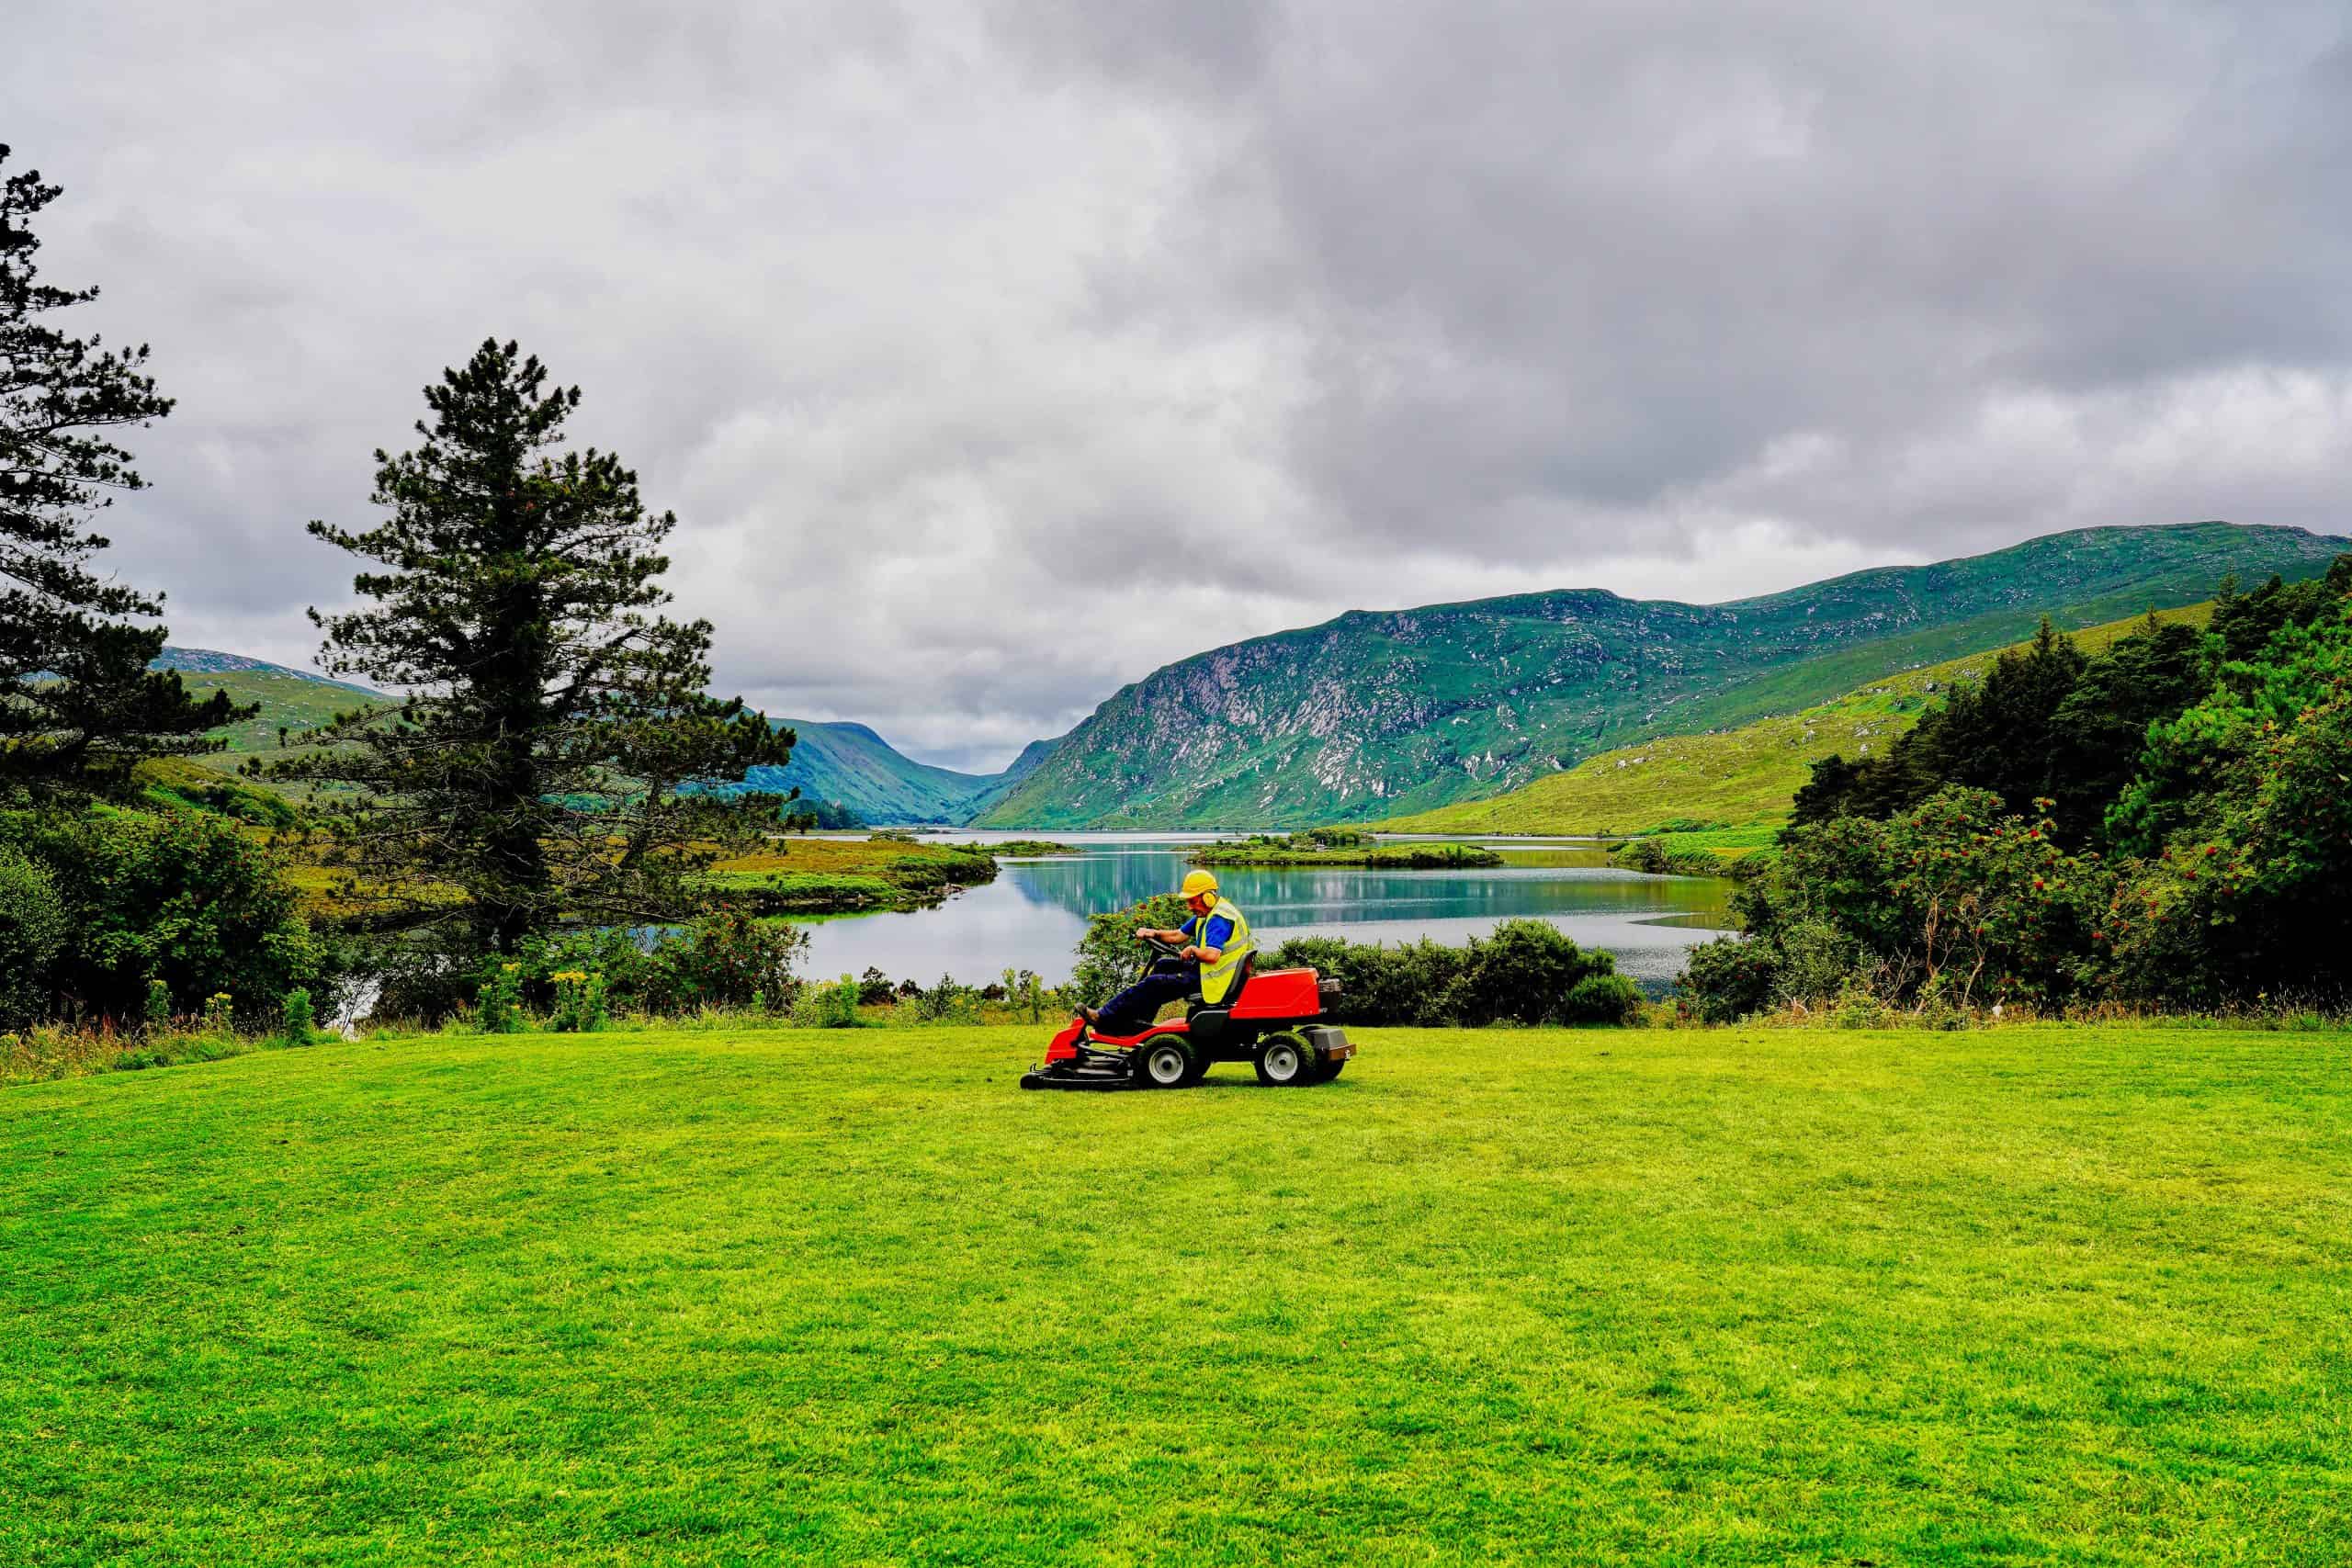 Man mowing lawn in front of lake